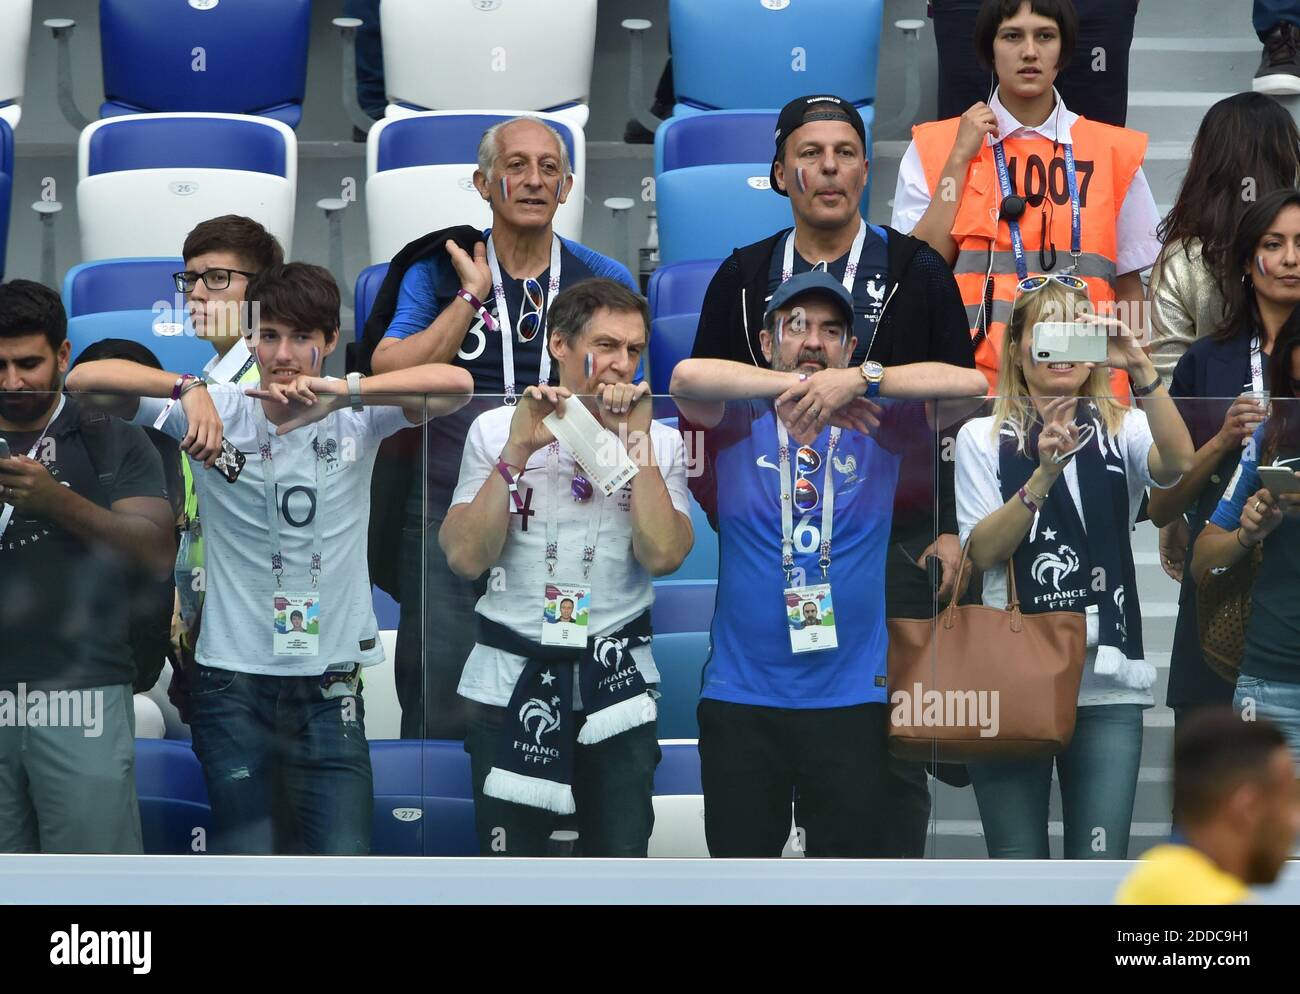 Dylan Deschamps and Bruno Solo attend the World Cup round of 8 game between France and Uruguay on July 6, 2018 in Nizhny Novgorod, Russia. Photo by Lionel Hahn/ABACAPRESS.COM Stock Photo